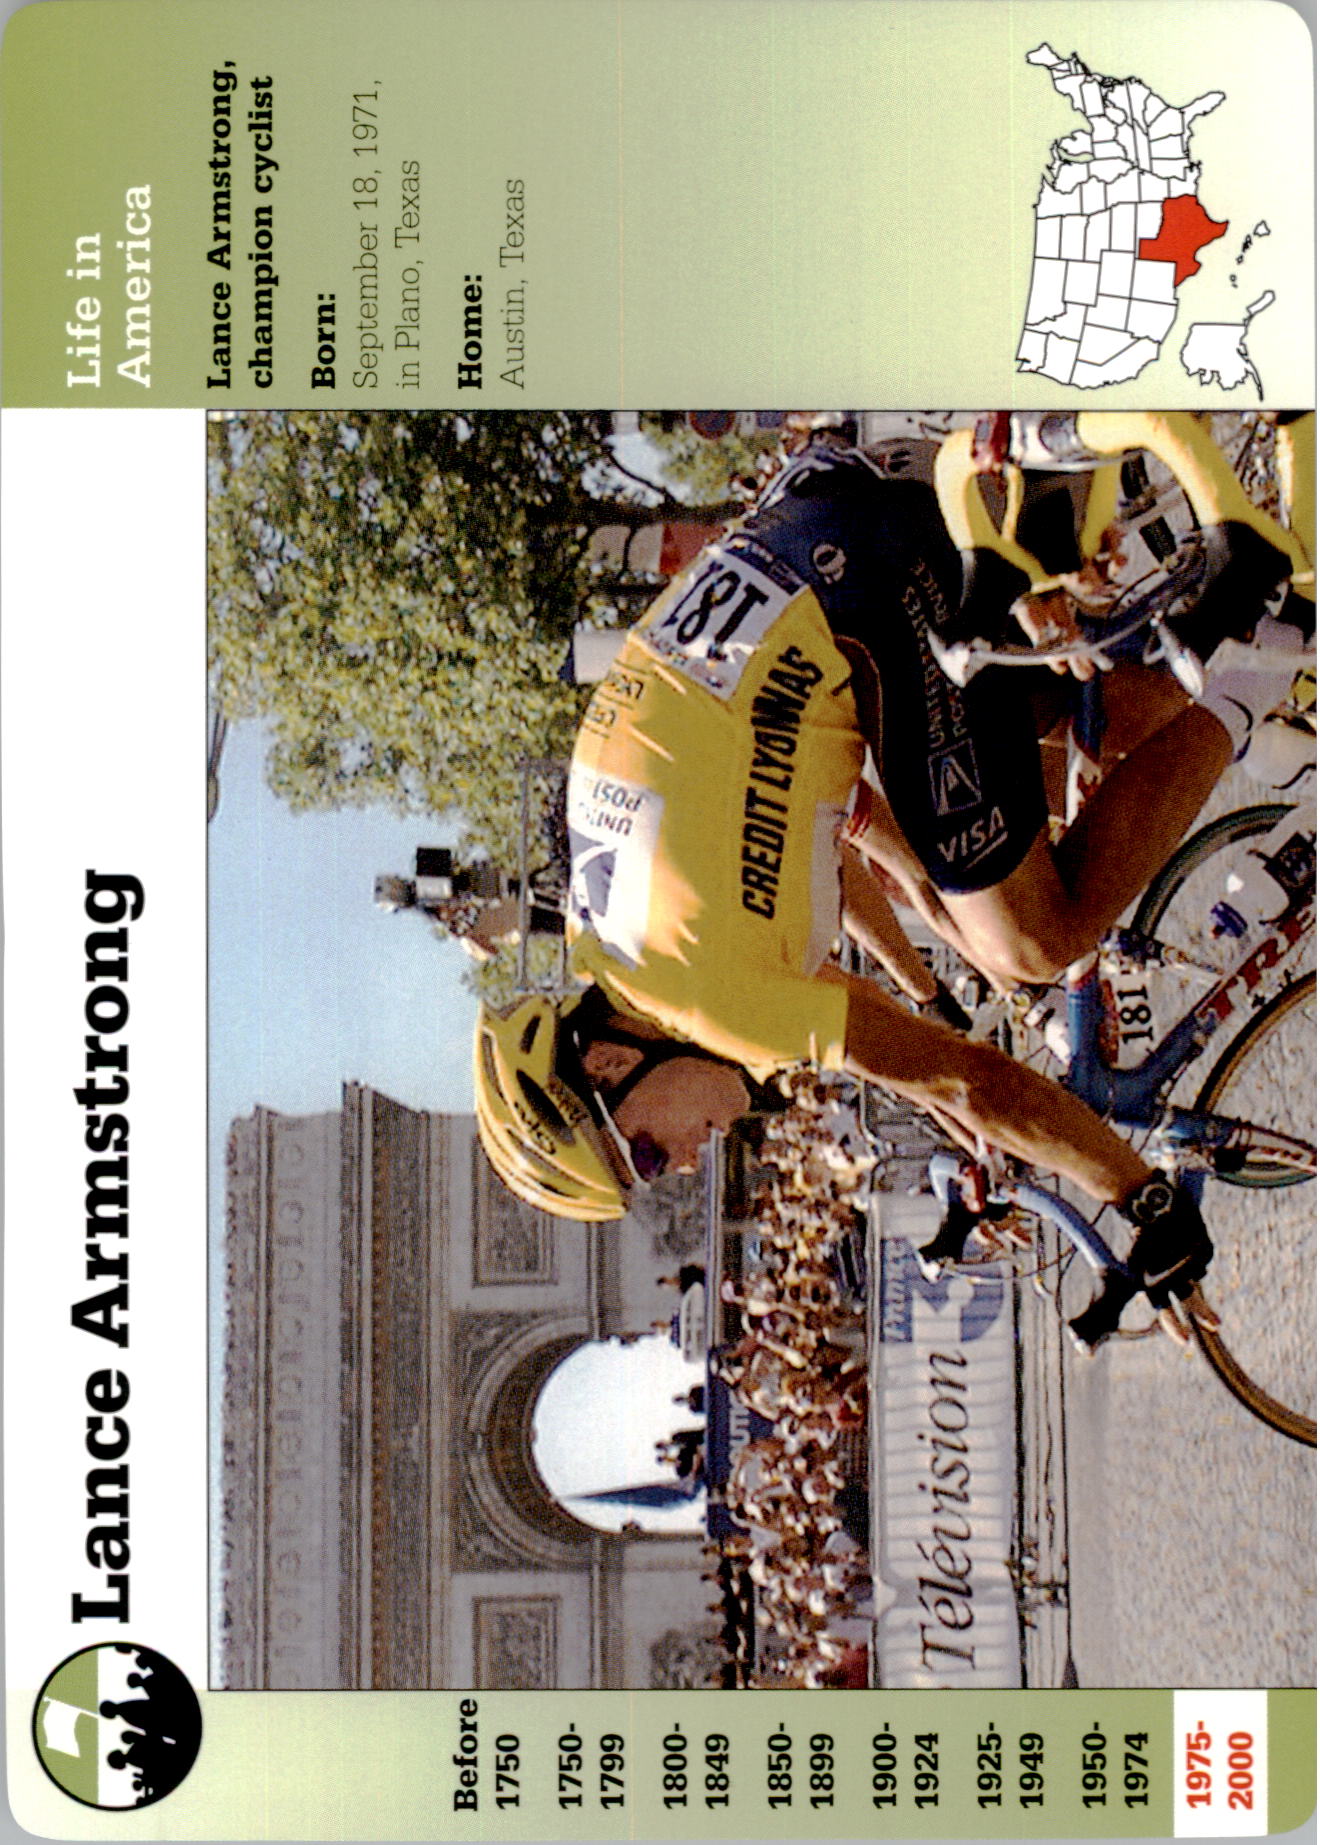  Lance Armstrong (cycling) player image